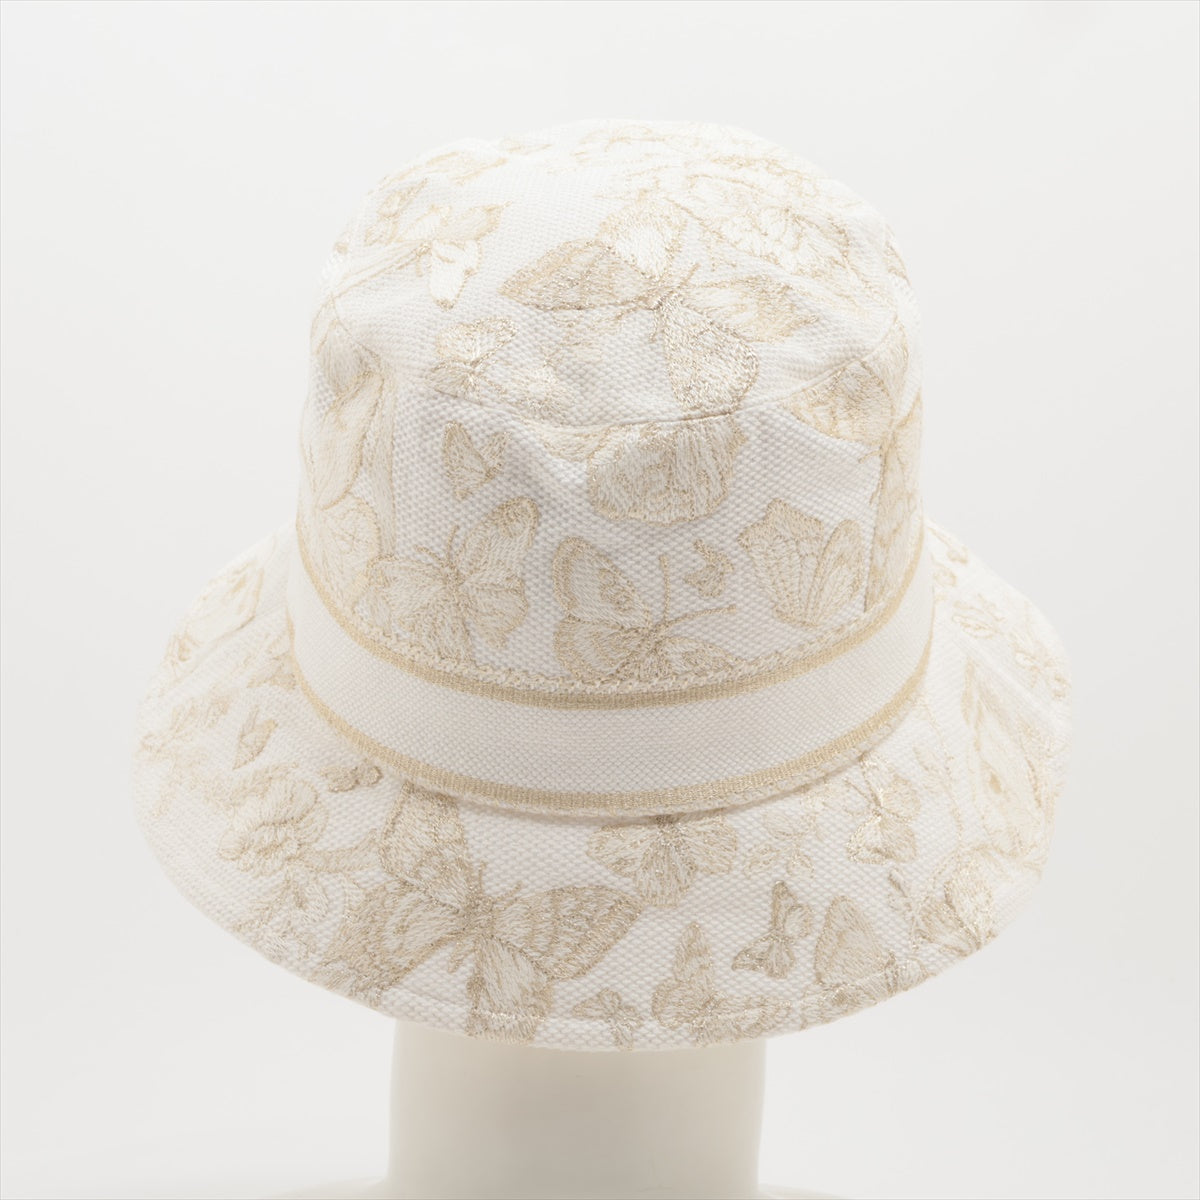 Dior Toile Doo JUY Embroidery Hat 56 Cotton & Polyester White x gold 41DTM923X131 Mexico Butterfly